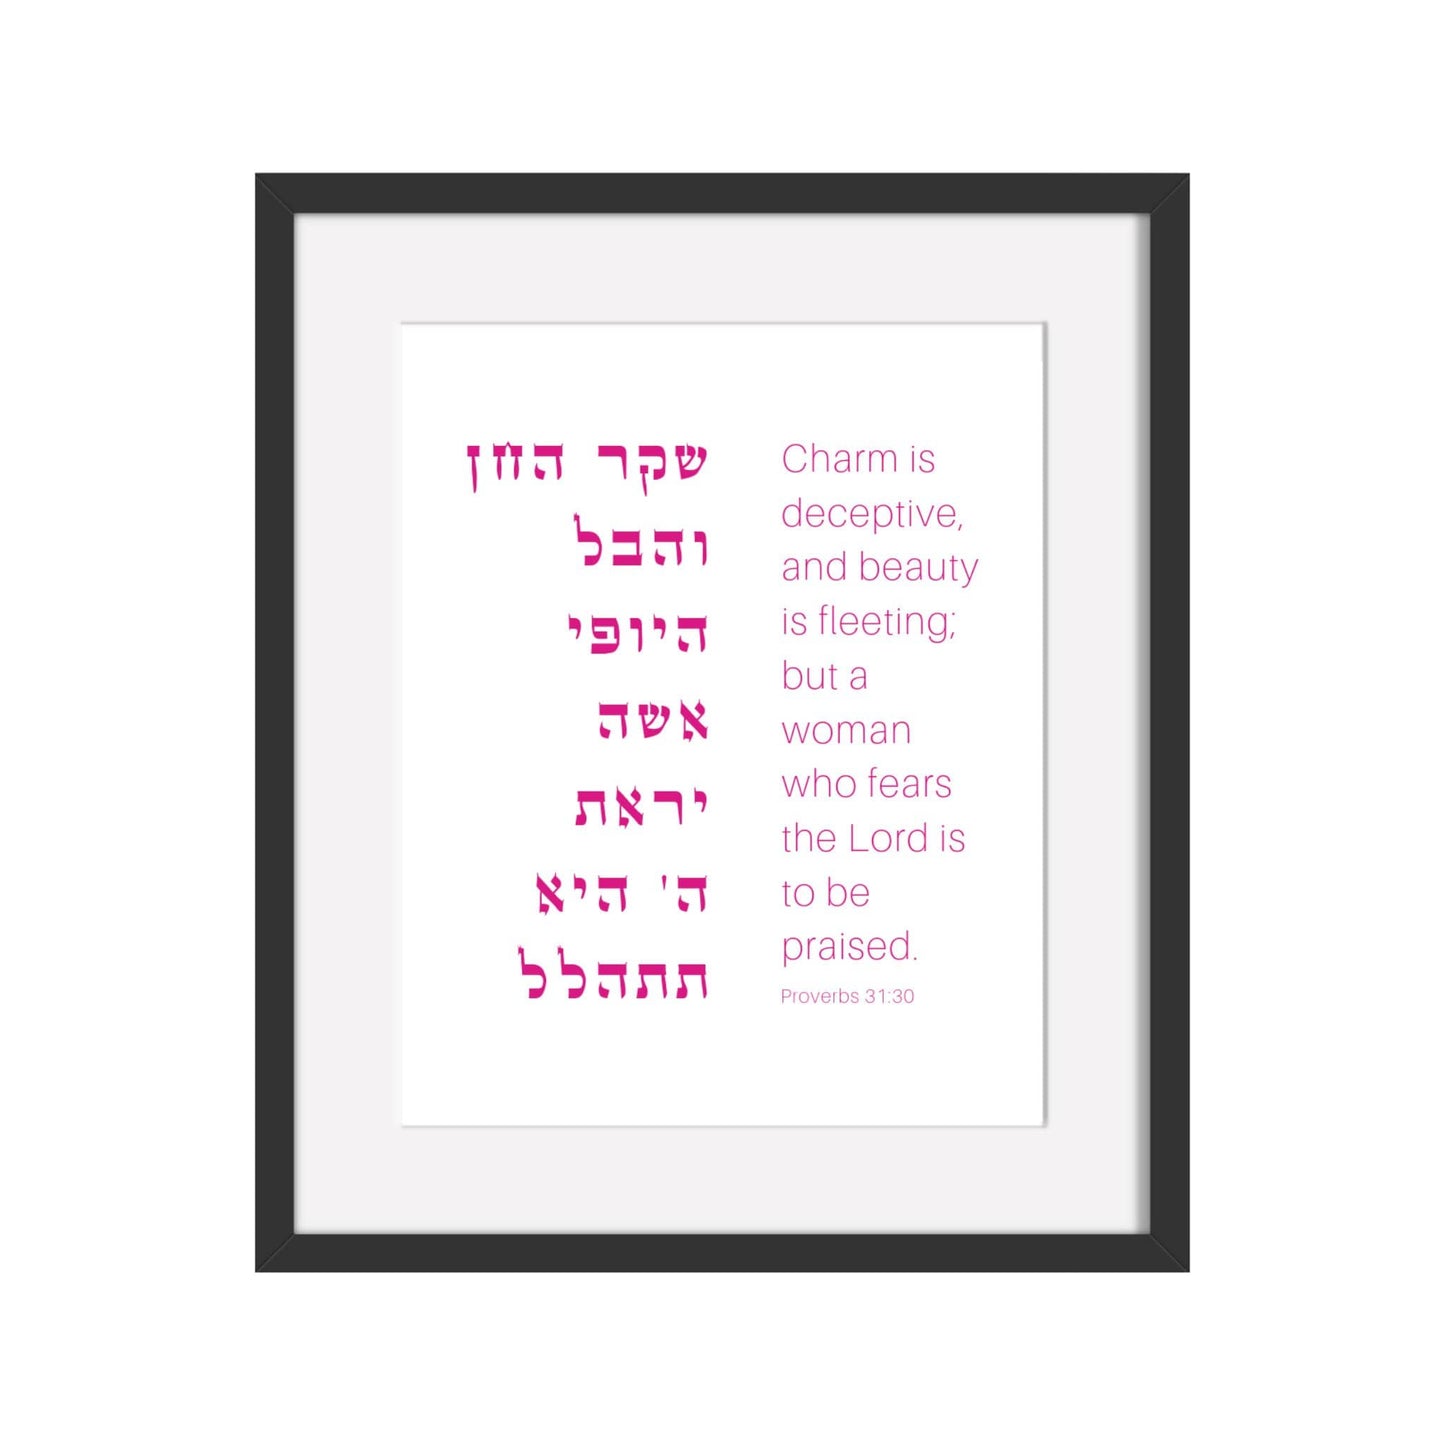 The Verse Proverbs 31:30 Proverbs 31:30 Charm is deceptive, and beauty is fleeting | Jewish Art